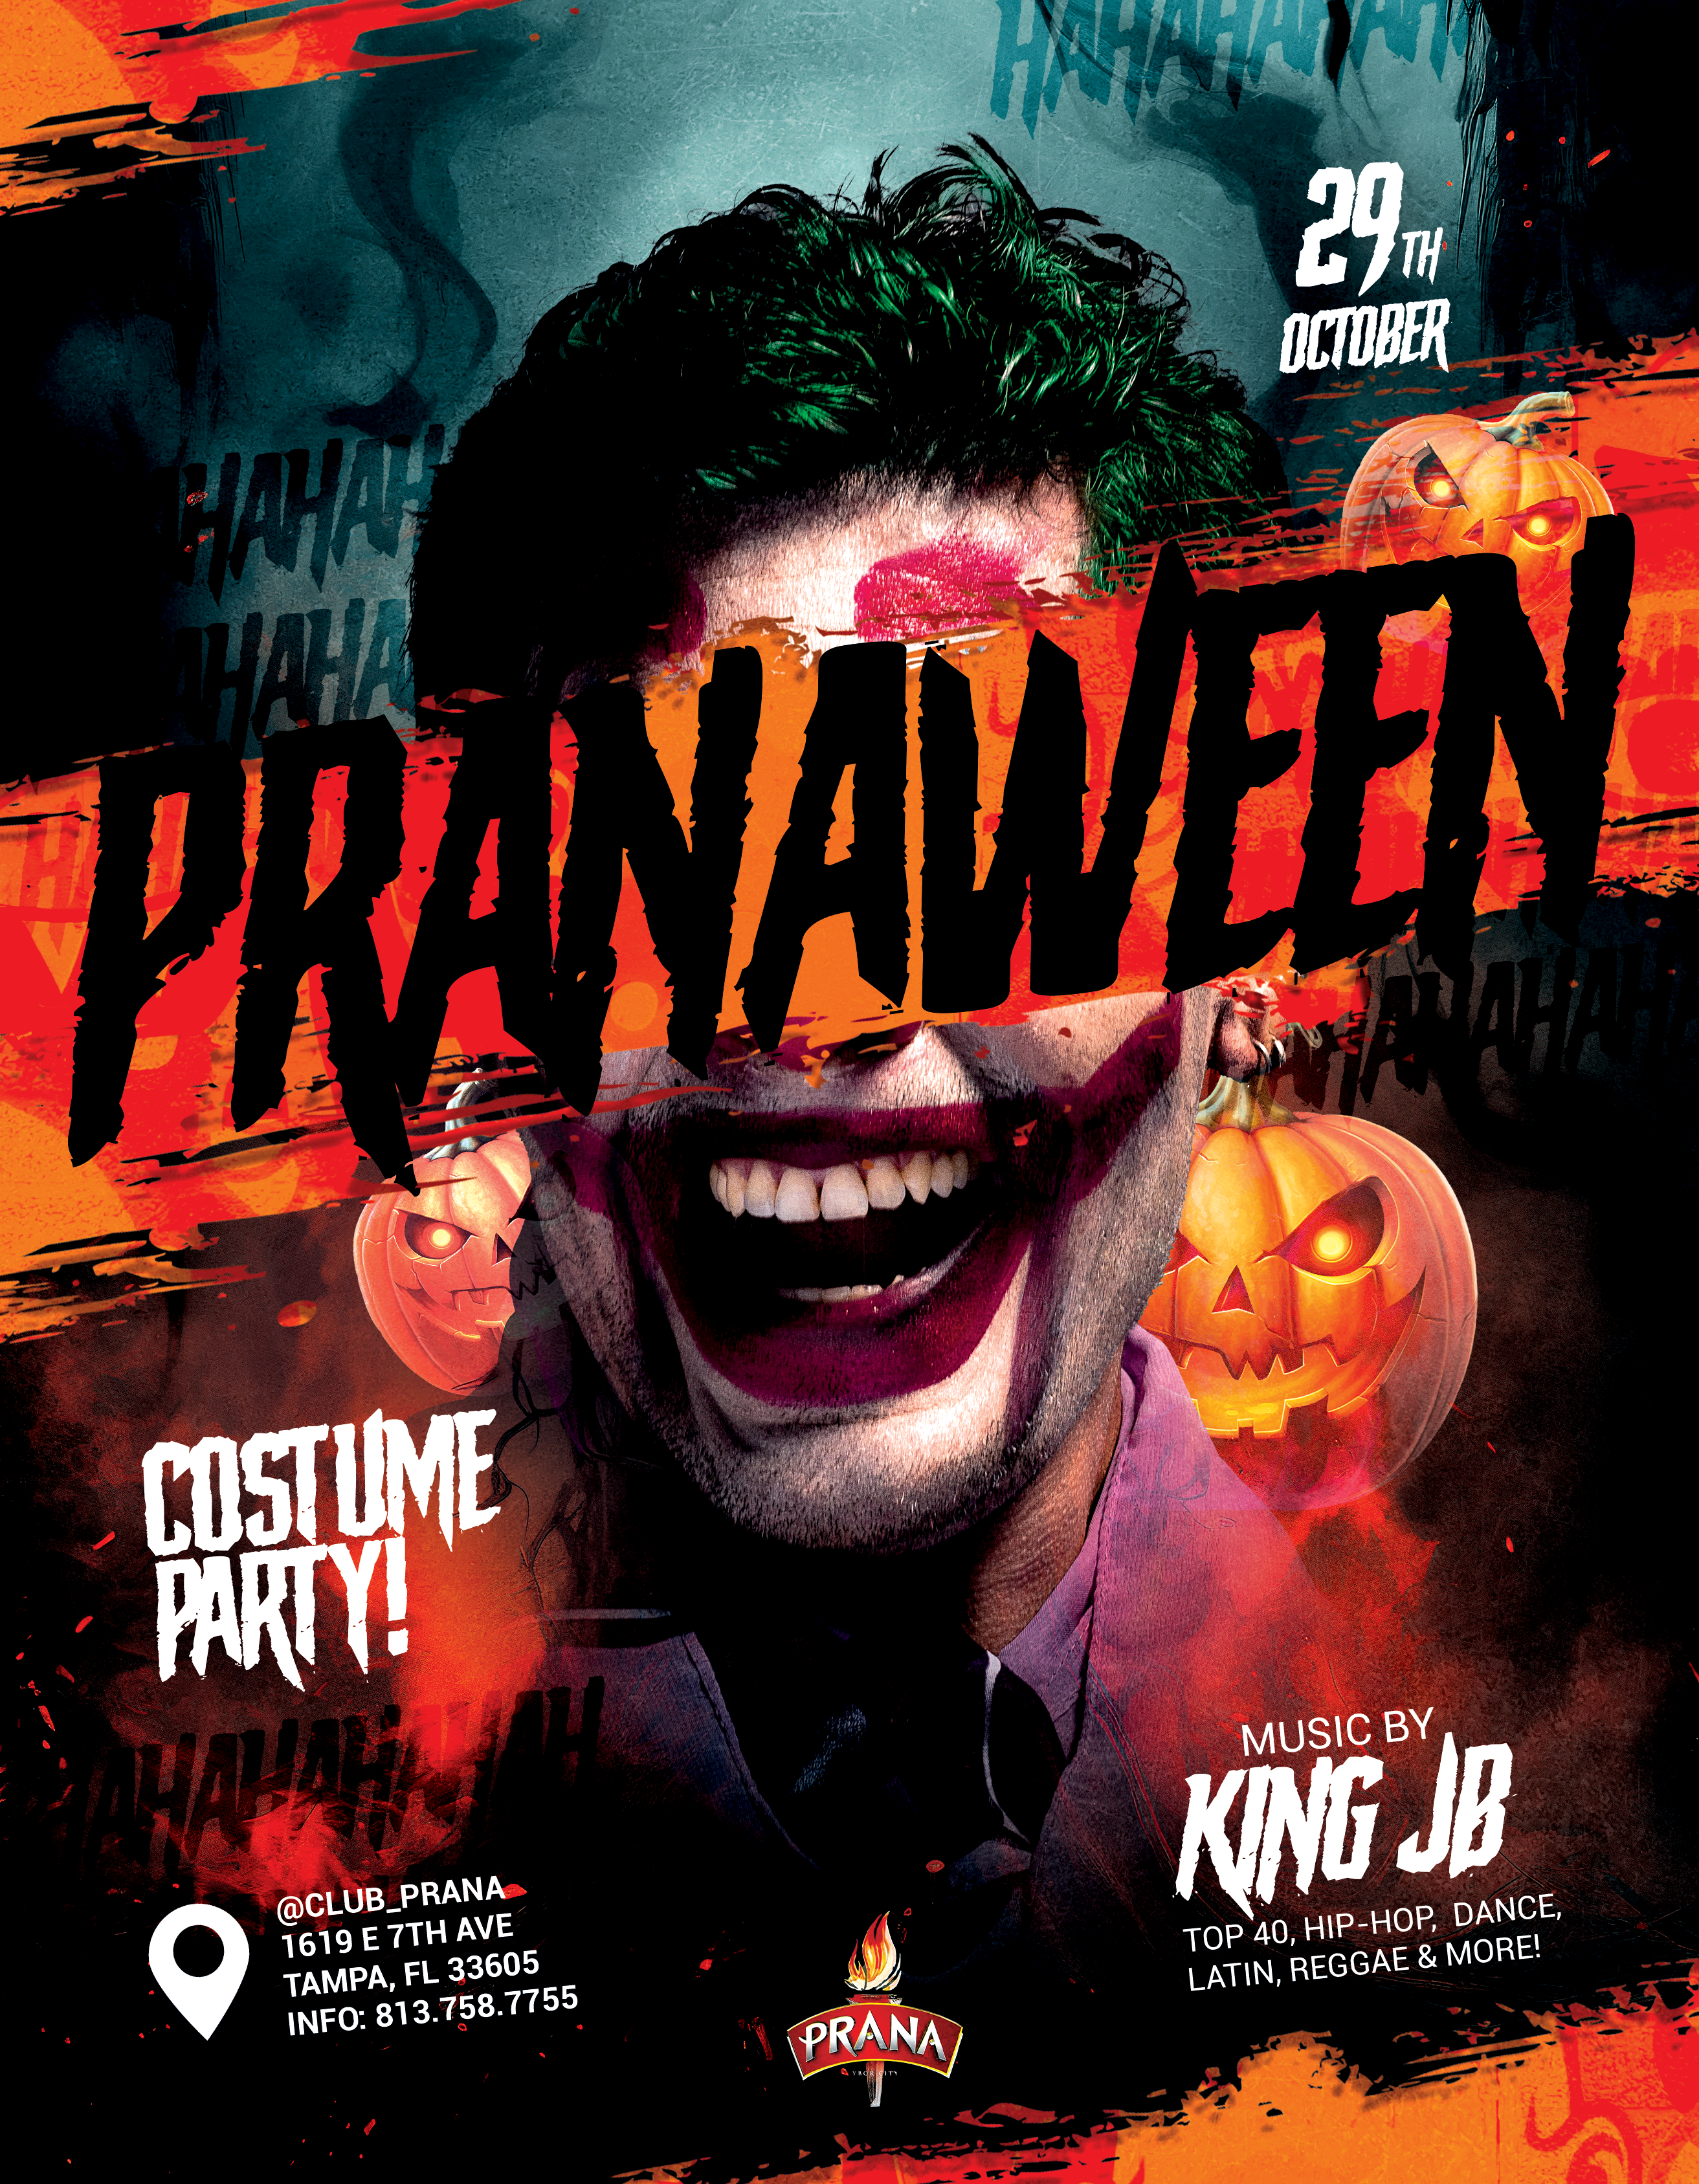 Club Prana Event Flyer For Pranaween, A Costume Party On Sunday, October 29th.